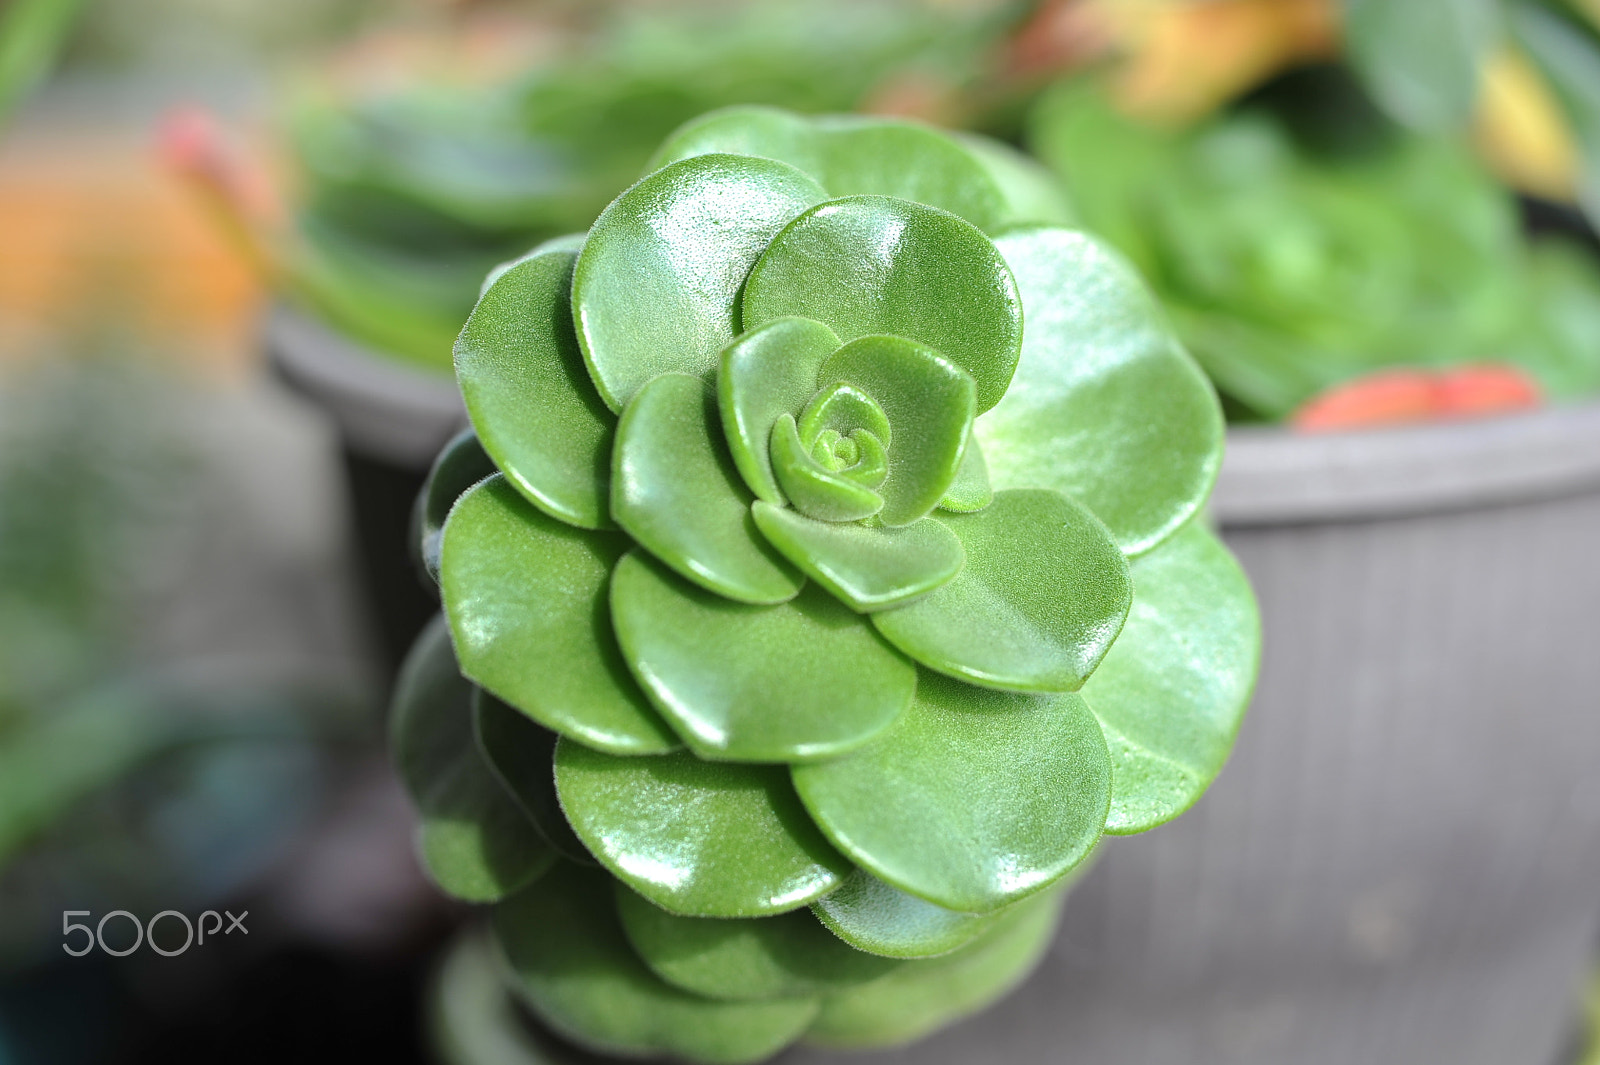 AF Micro-Nikkor 55mm f/2.8 sample photo. Succulents photography